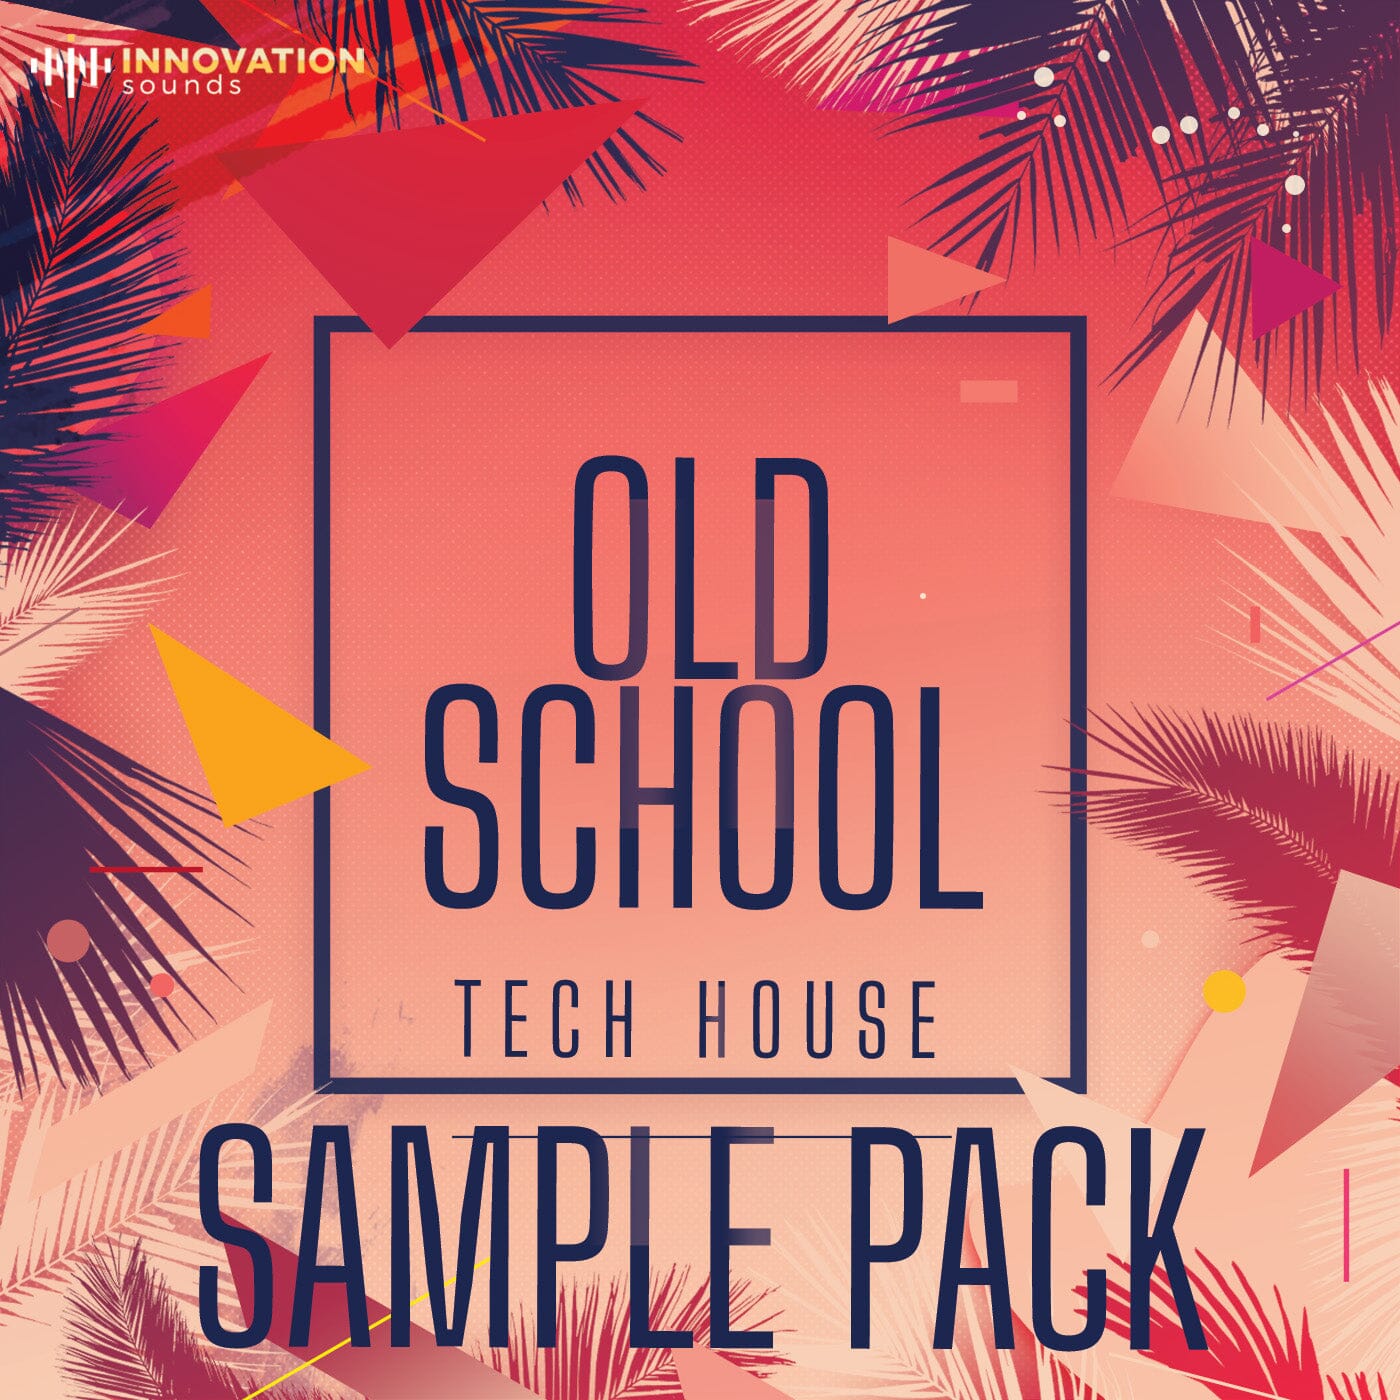 Old School - Tech House Sample Pack (WAV and MIDI Files) Sample Pack Innovation Sounds